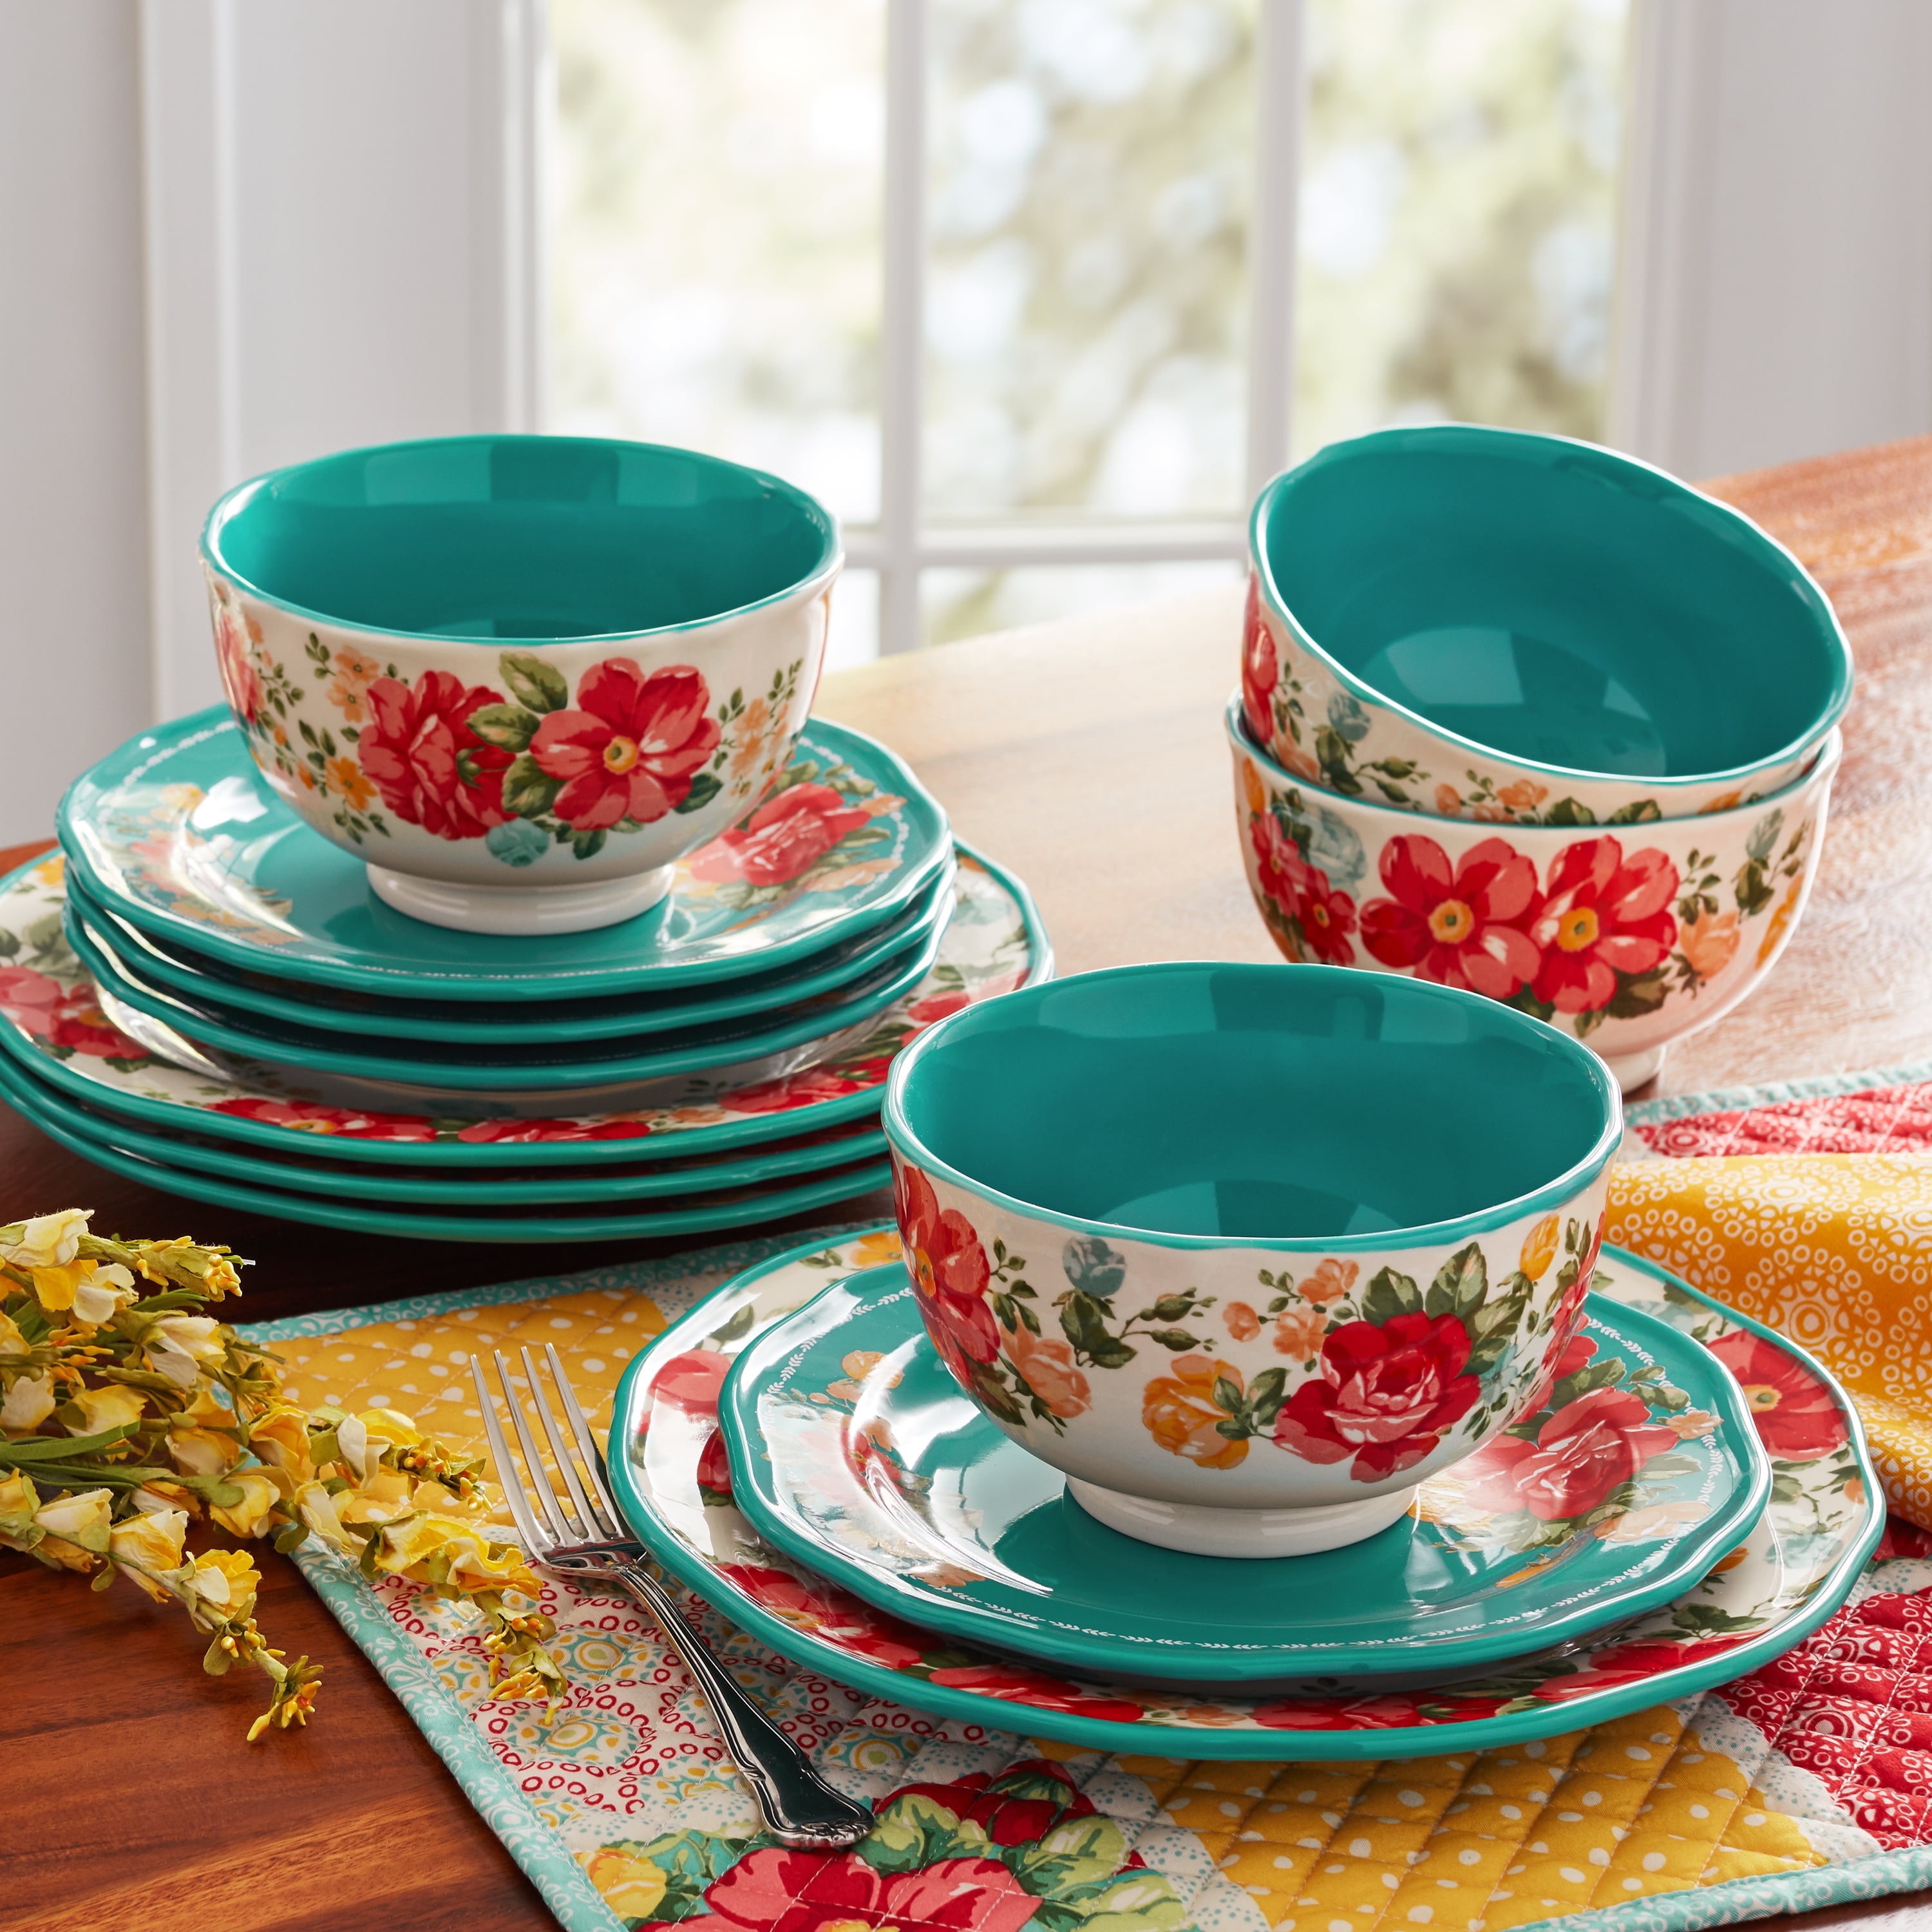 Pioneer Woman 12-Piece Dinnerware Set Lace Cowgirl Plates Bowls Stoneware Teal 